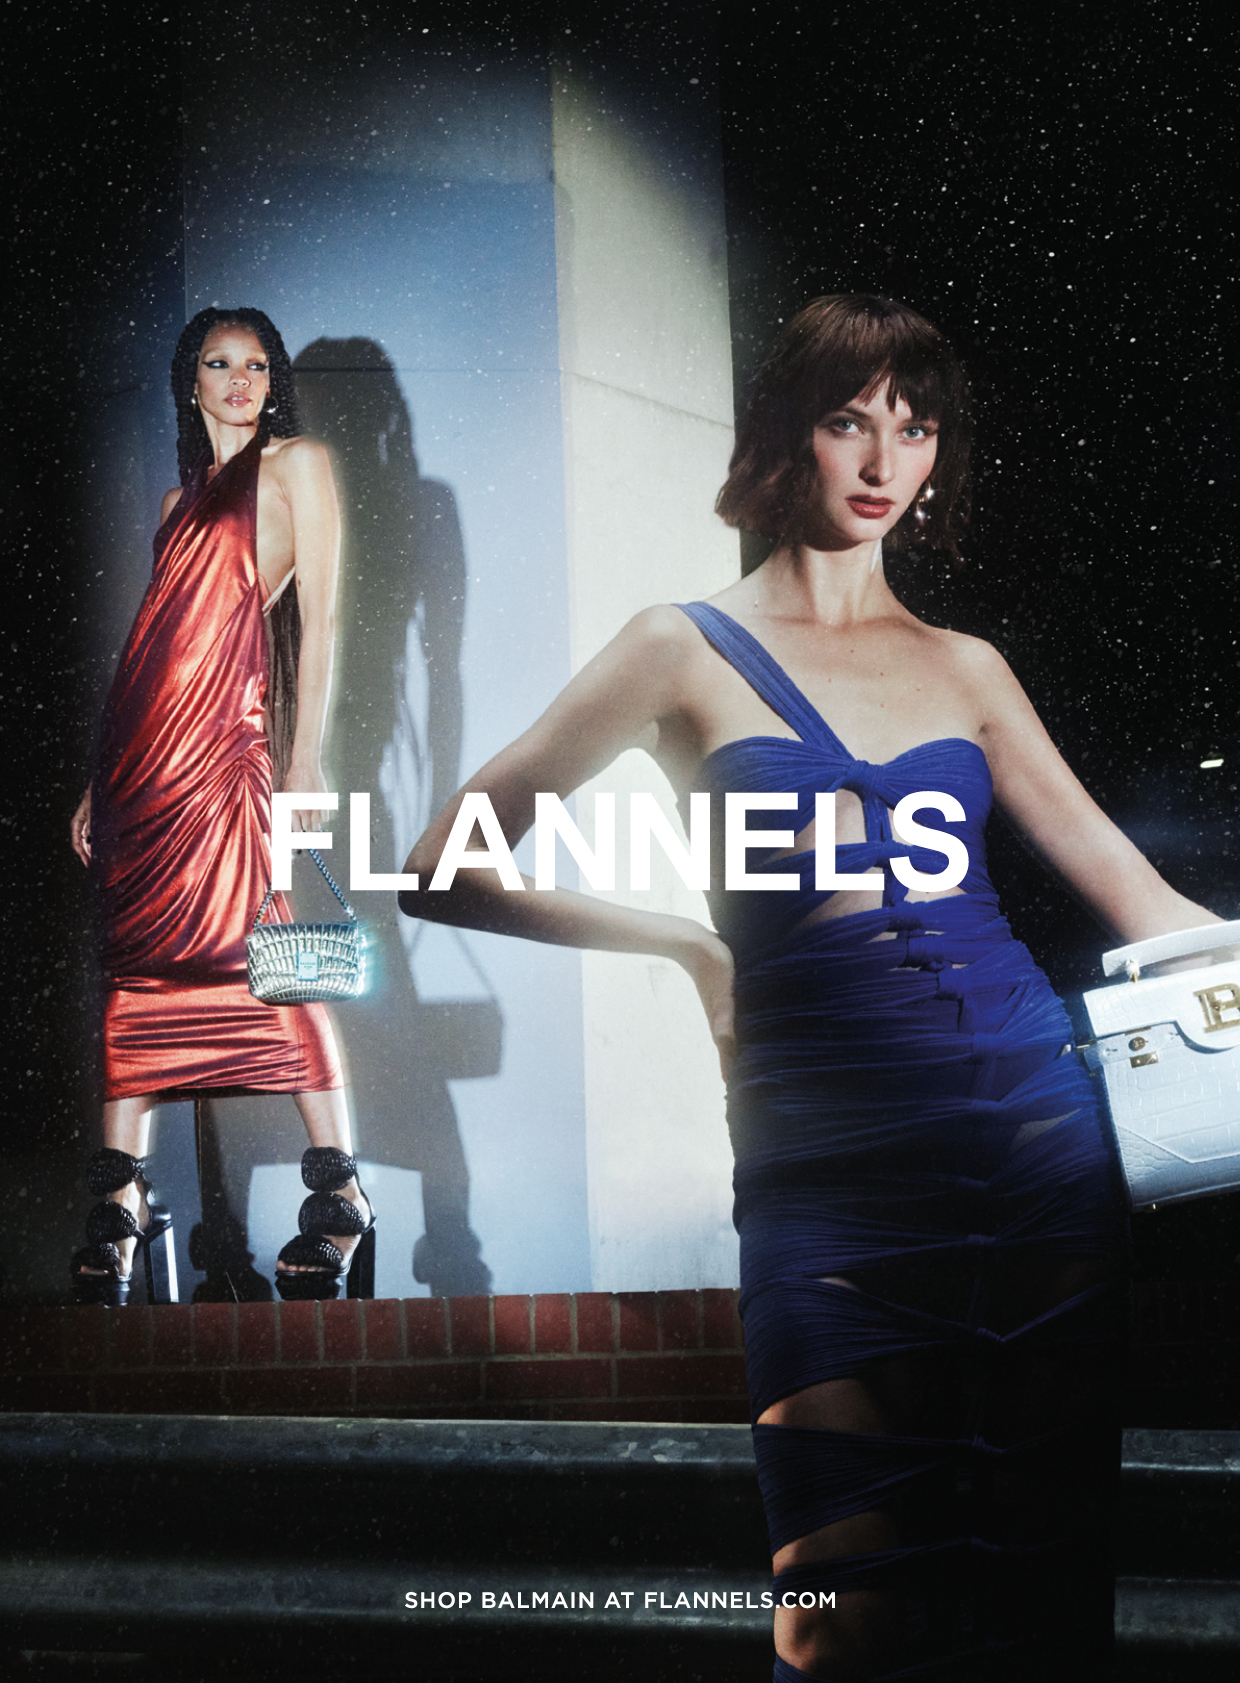 Two models – one in a red evening dress the other in a purple evening dress with Flannels logo across the middle of the page.